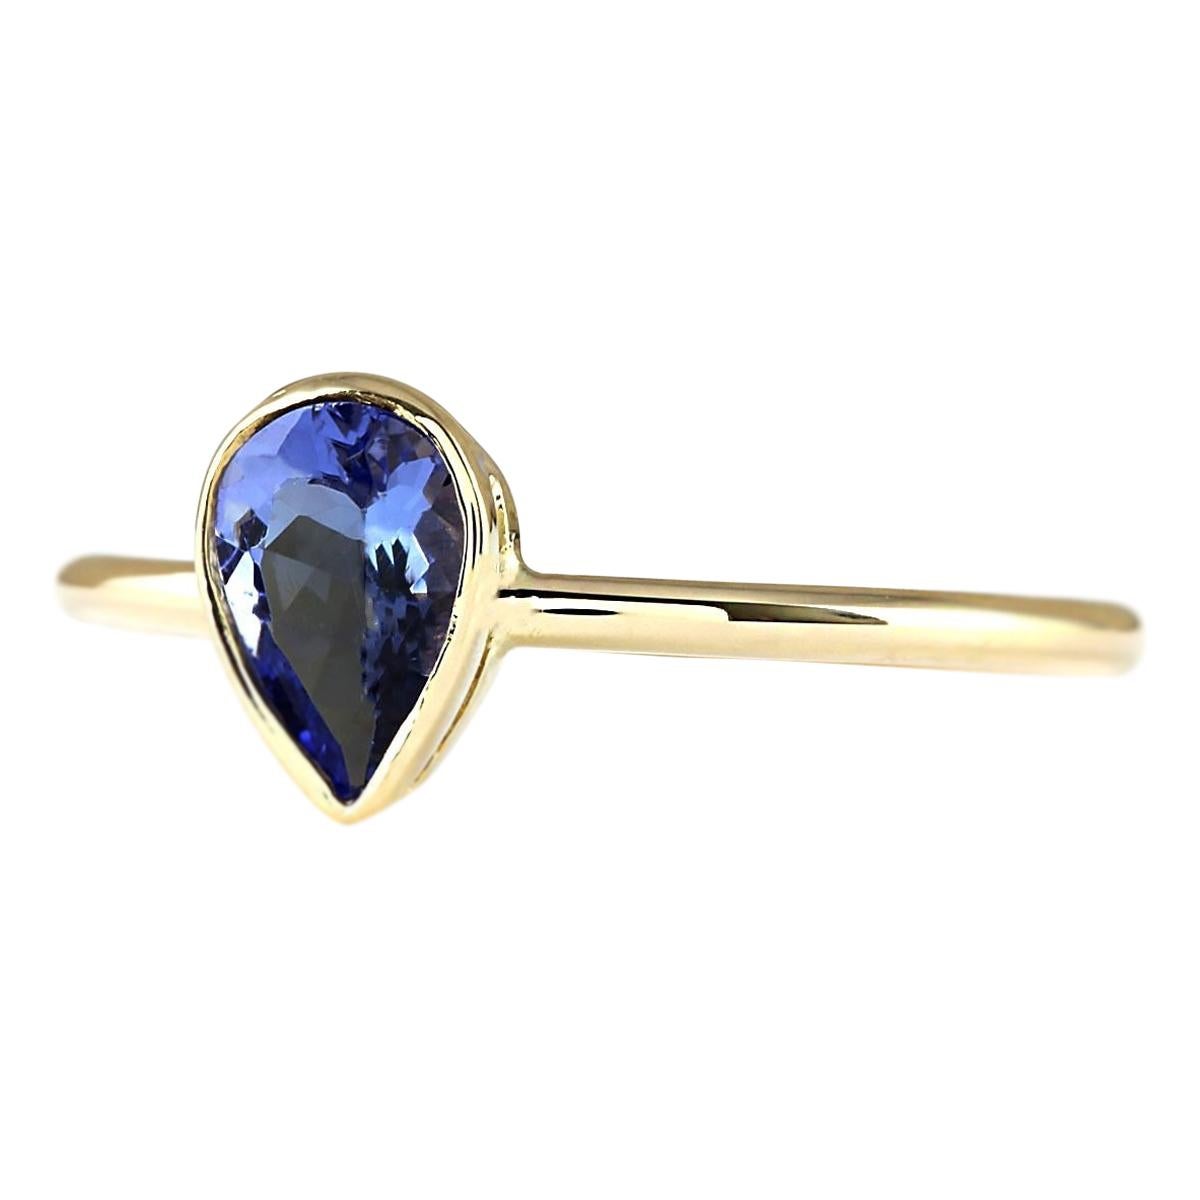 Introducing our exquisite 14 Karat Yellow Gold Ring adorned with a stunning 0.50 Carat Natural Tanzanite gemstone. Stamped for authenticity, this ring weighs a mere 1.2 grams, ensuring comfort and wearability. The Tanzanite gemstone, boasting a